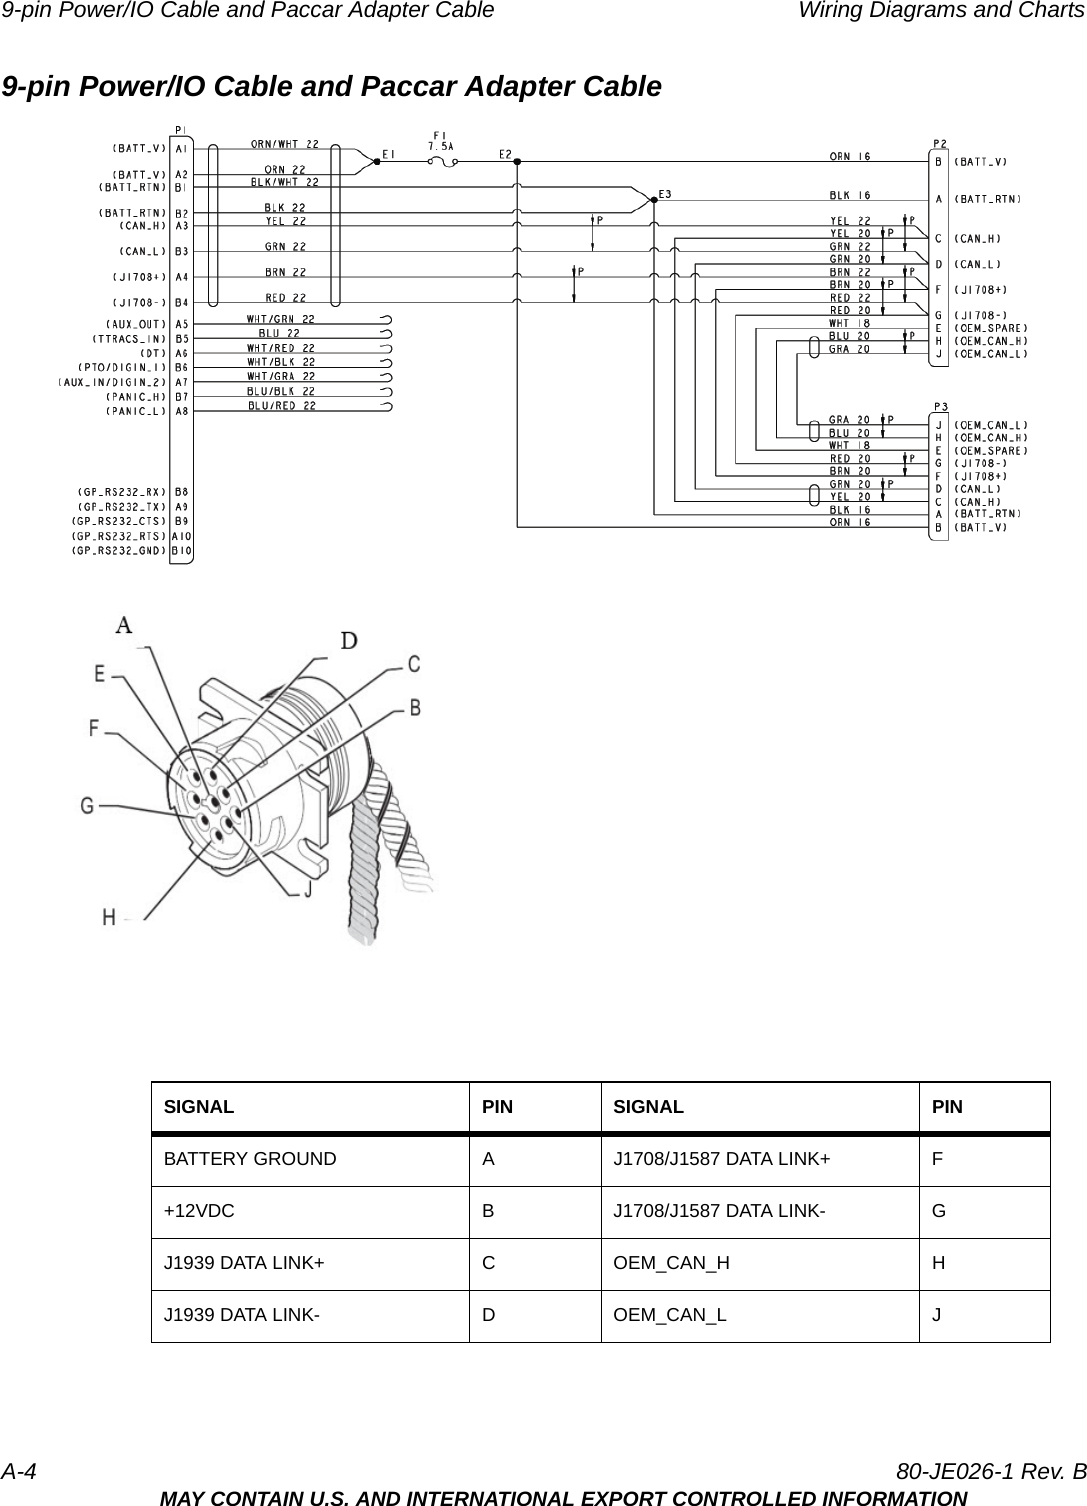 9-pin Power/IO Cable and Paccar Adapter Cable Wiring Diagrams and ChartsA-4 80-JE026-1 Rev. BMAY CONTAIN U.S. AND INTERNATIONAL EXPORT CONTROLLED INFORMATION9-pin Power/IO Cable and Paccar Adapter CableSIGNAL PIN SIGNAL PINBATTERY GROUND A J1708/J1587 DATA LINK+ F+12VDC B J1708/J1587 DATA LINK- GJ1939 DATA LINK+ C OEM_CAN_H HJ1939 DATA LINK- D OEM_CAN_L J